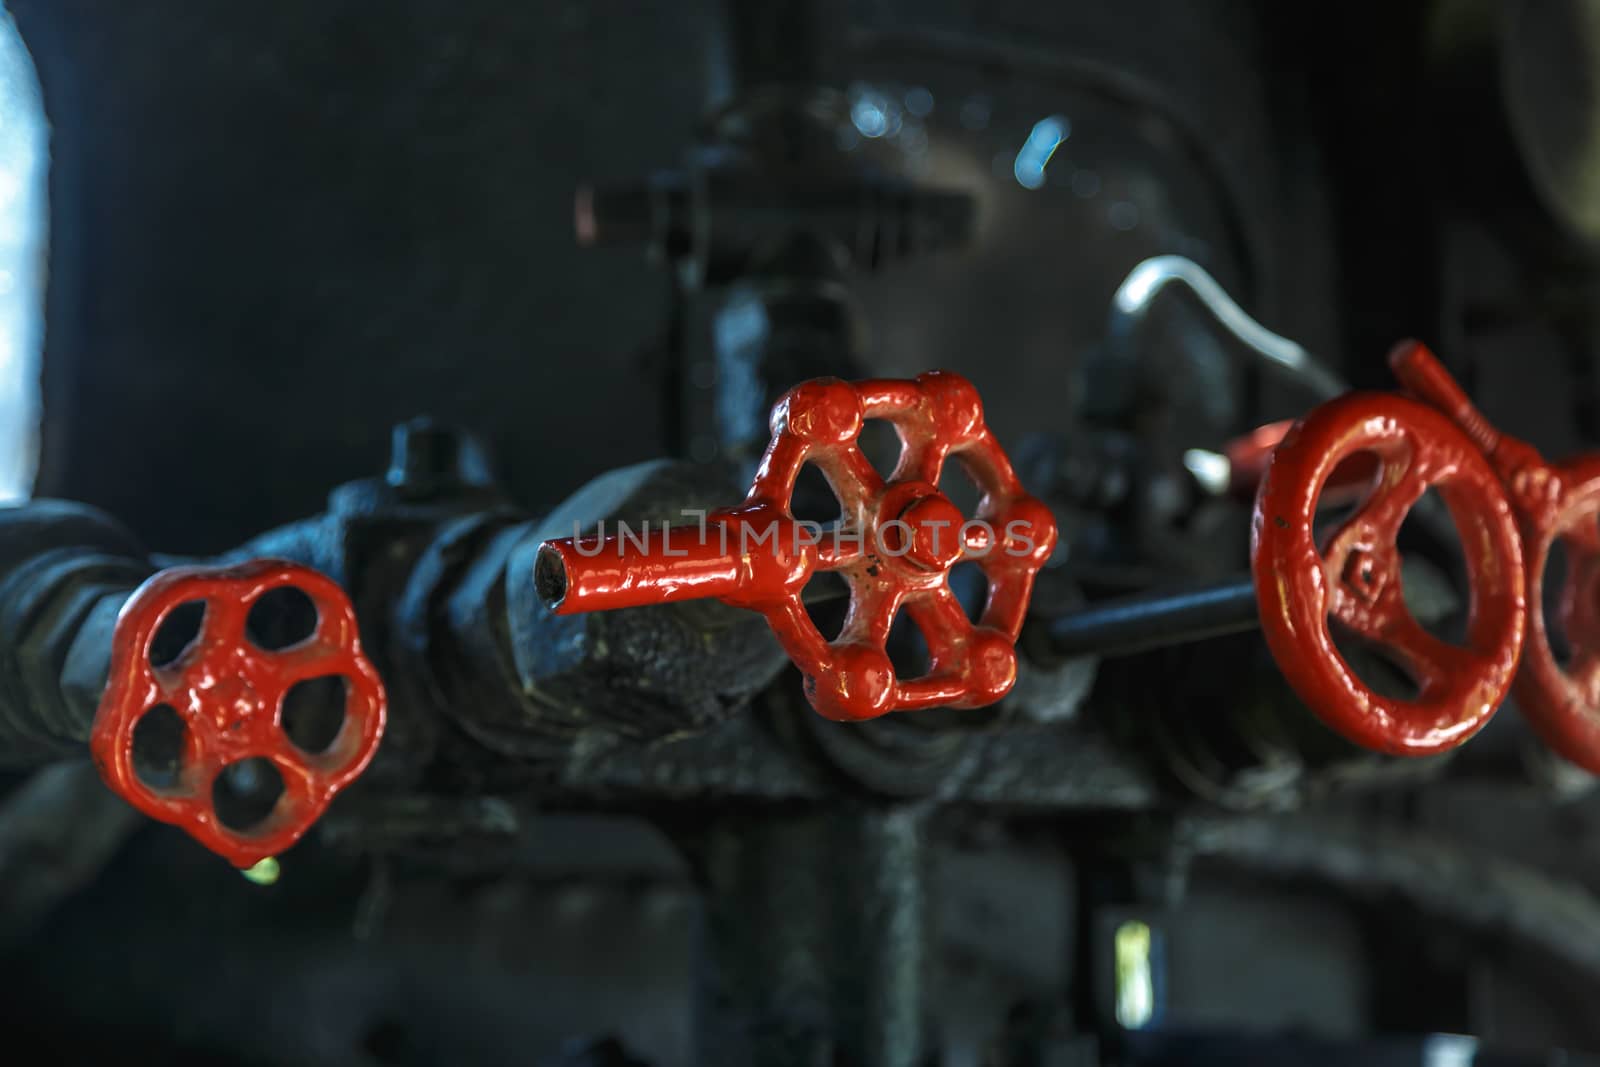 Industrial Valve and Cable by niglaynike